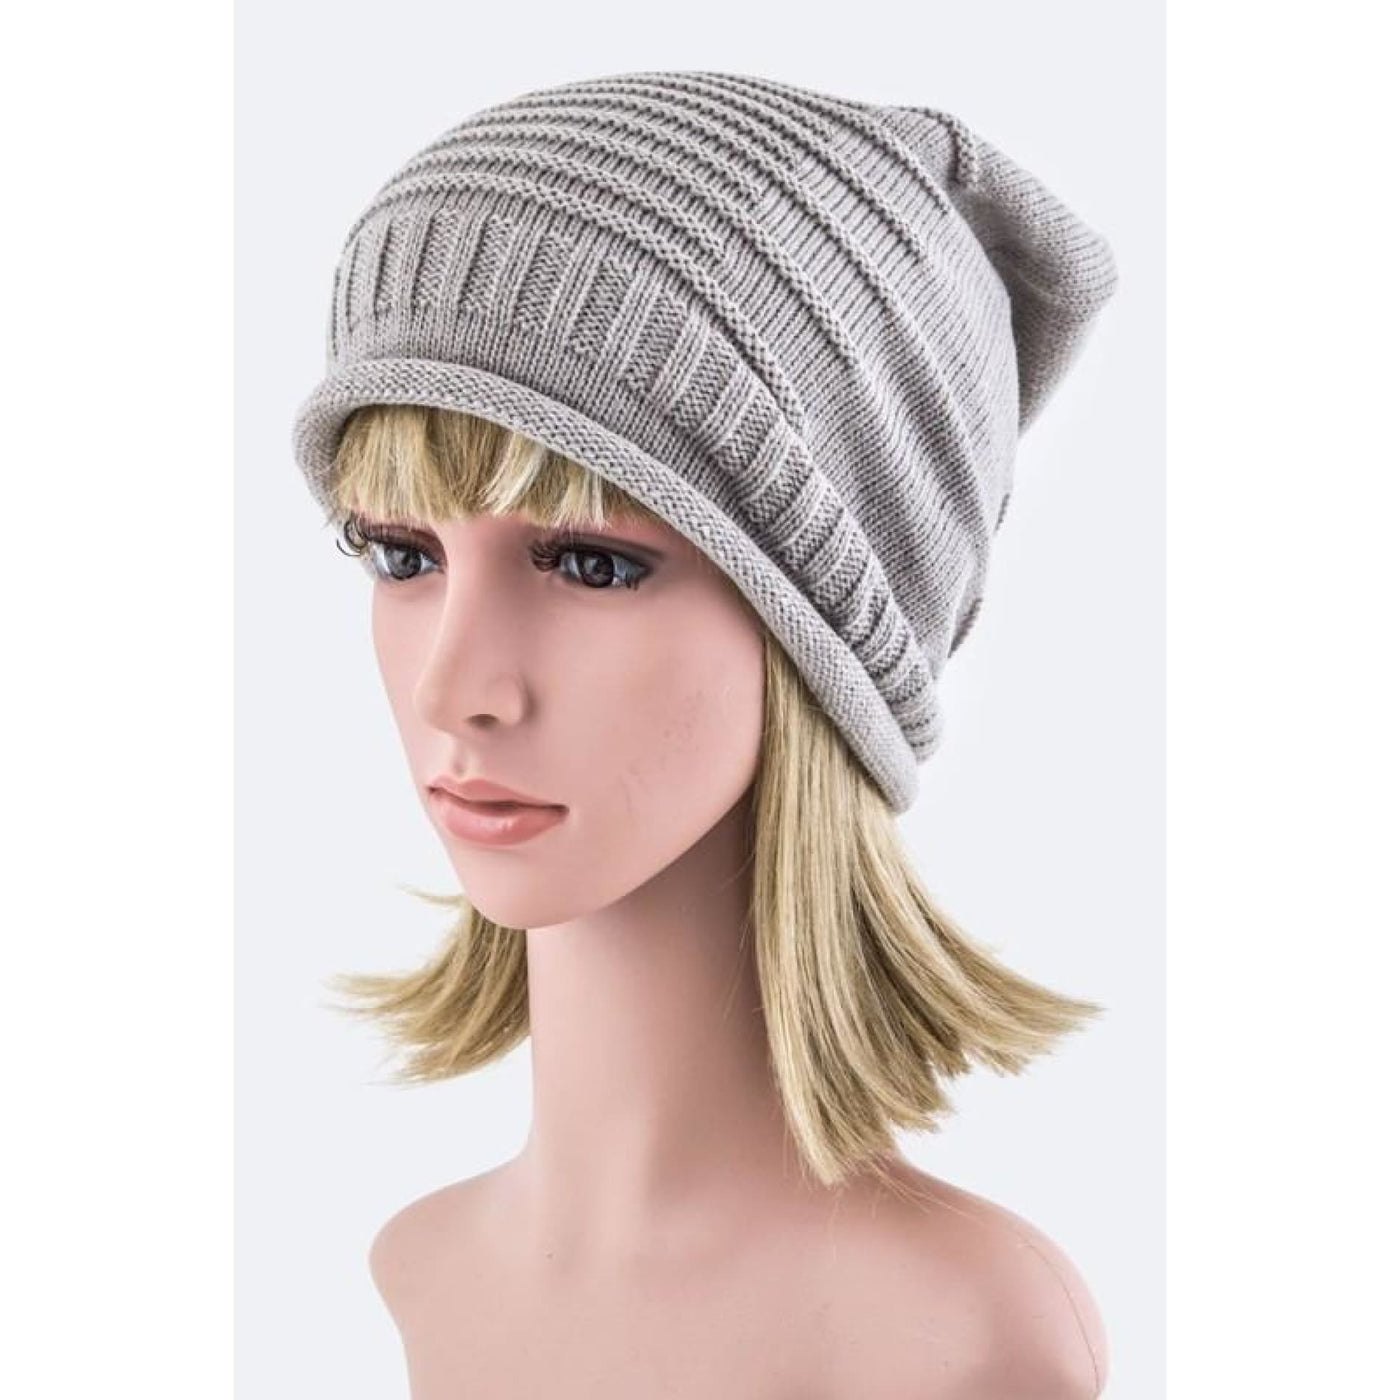 Raised Knit Slouchy Beanie - Grey - Accessories